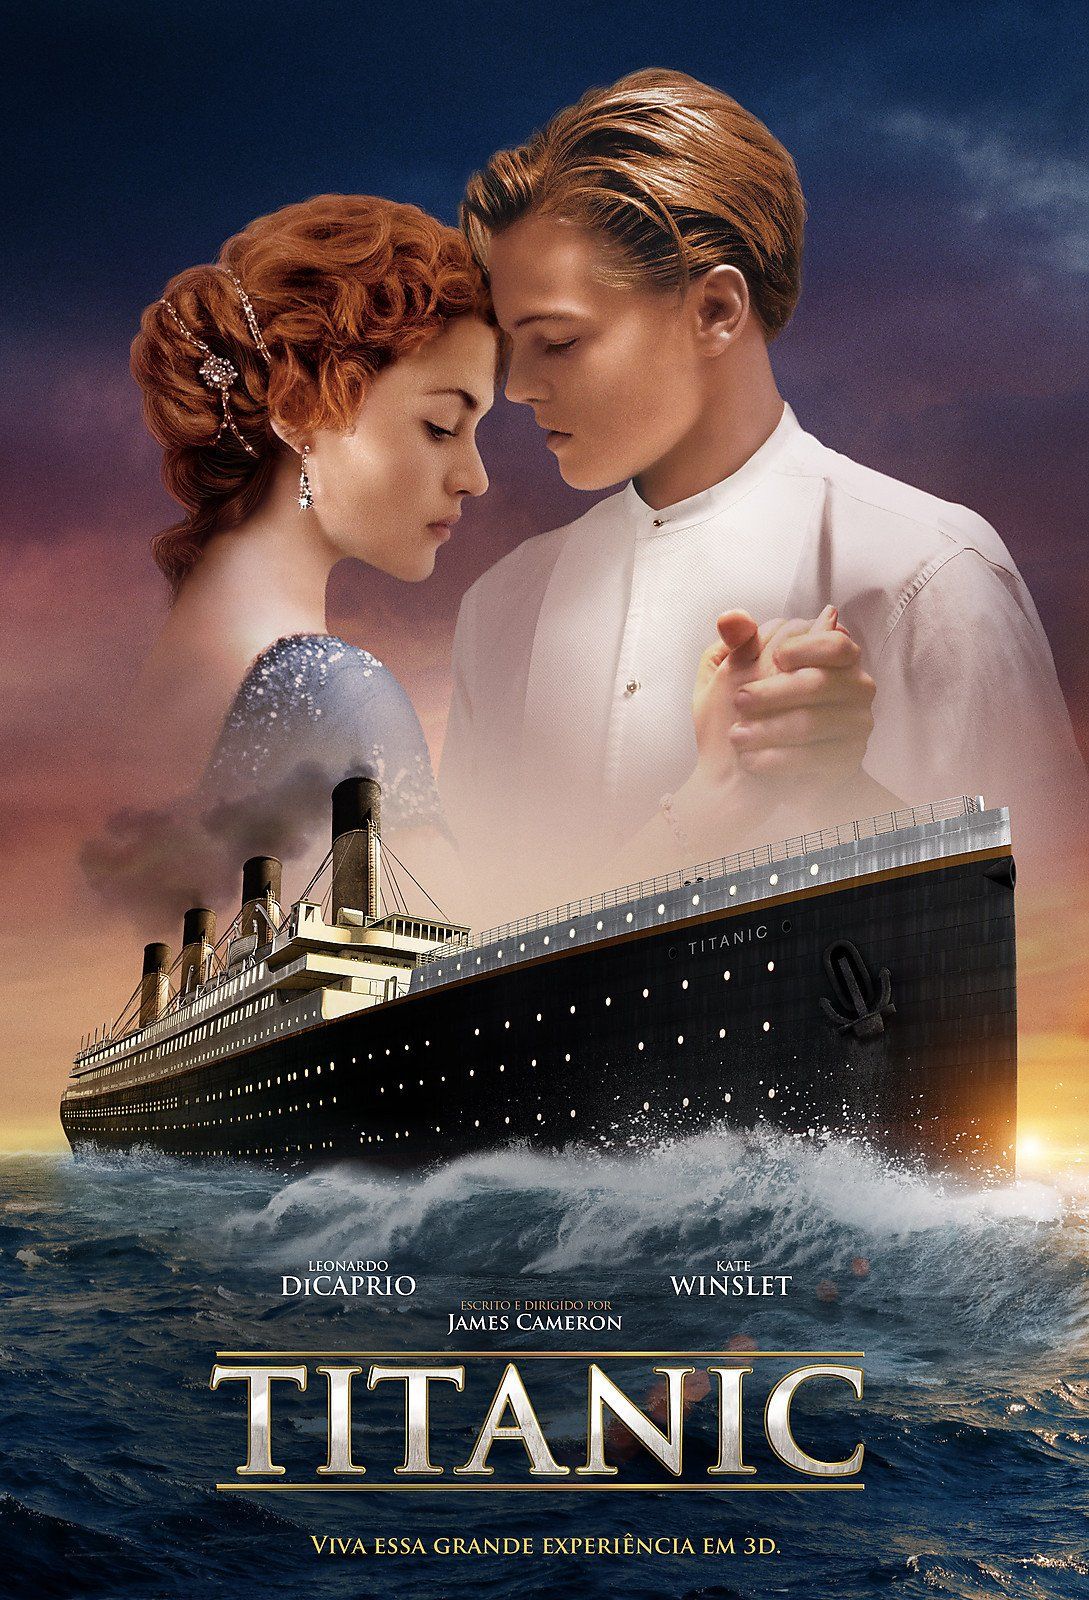 Titanic Reviews + Where to Watch Movie Online, Stream or Skip?